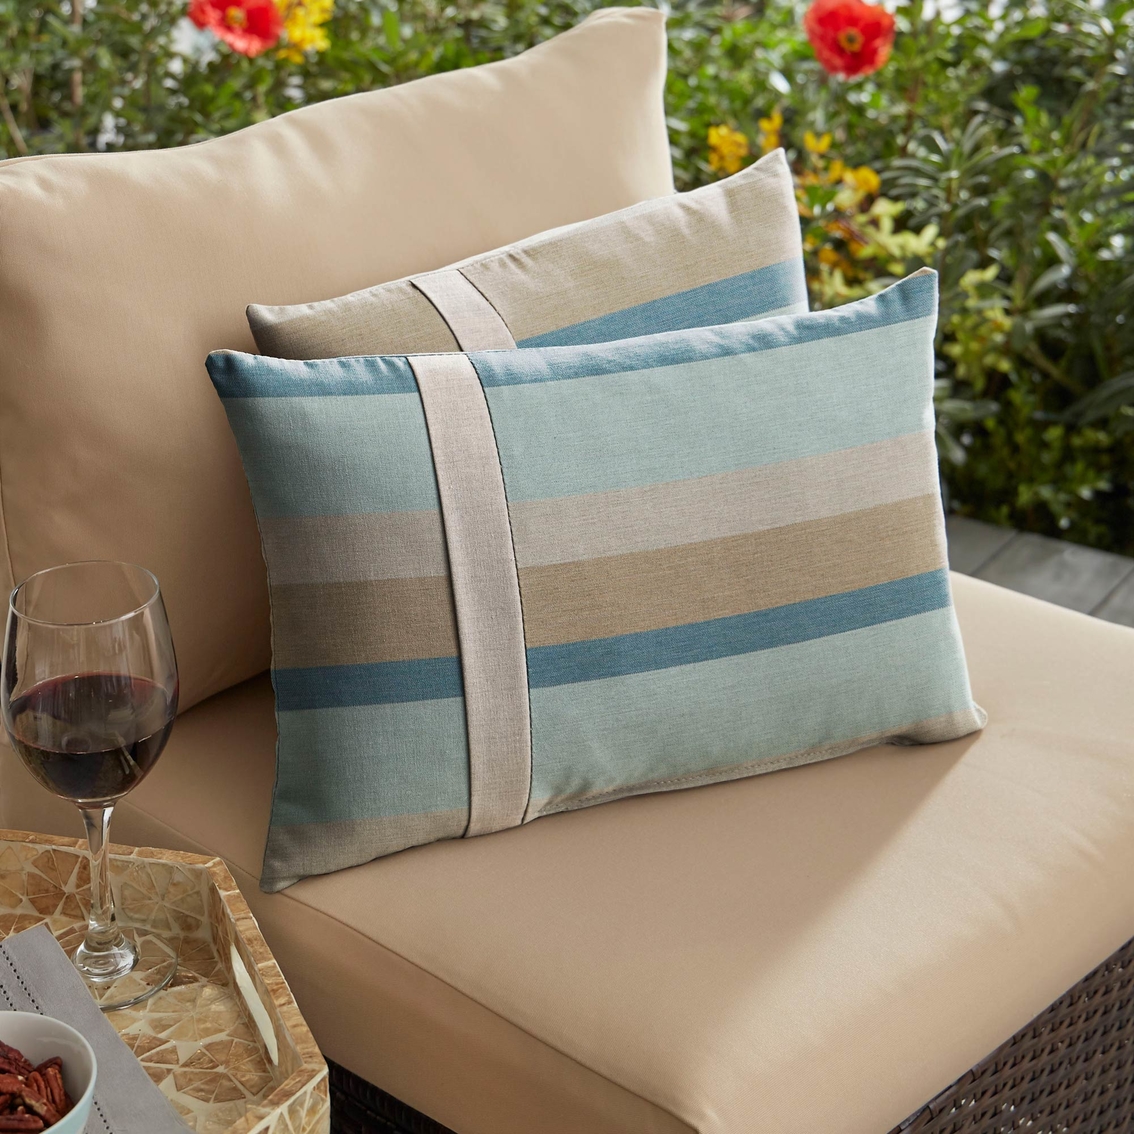 Mozaic Sunbrella Gateway Mist Stripe with Silver Blue Large Flange Pillows Set of 2 - Image 2 of 2